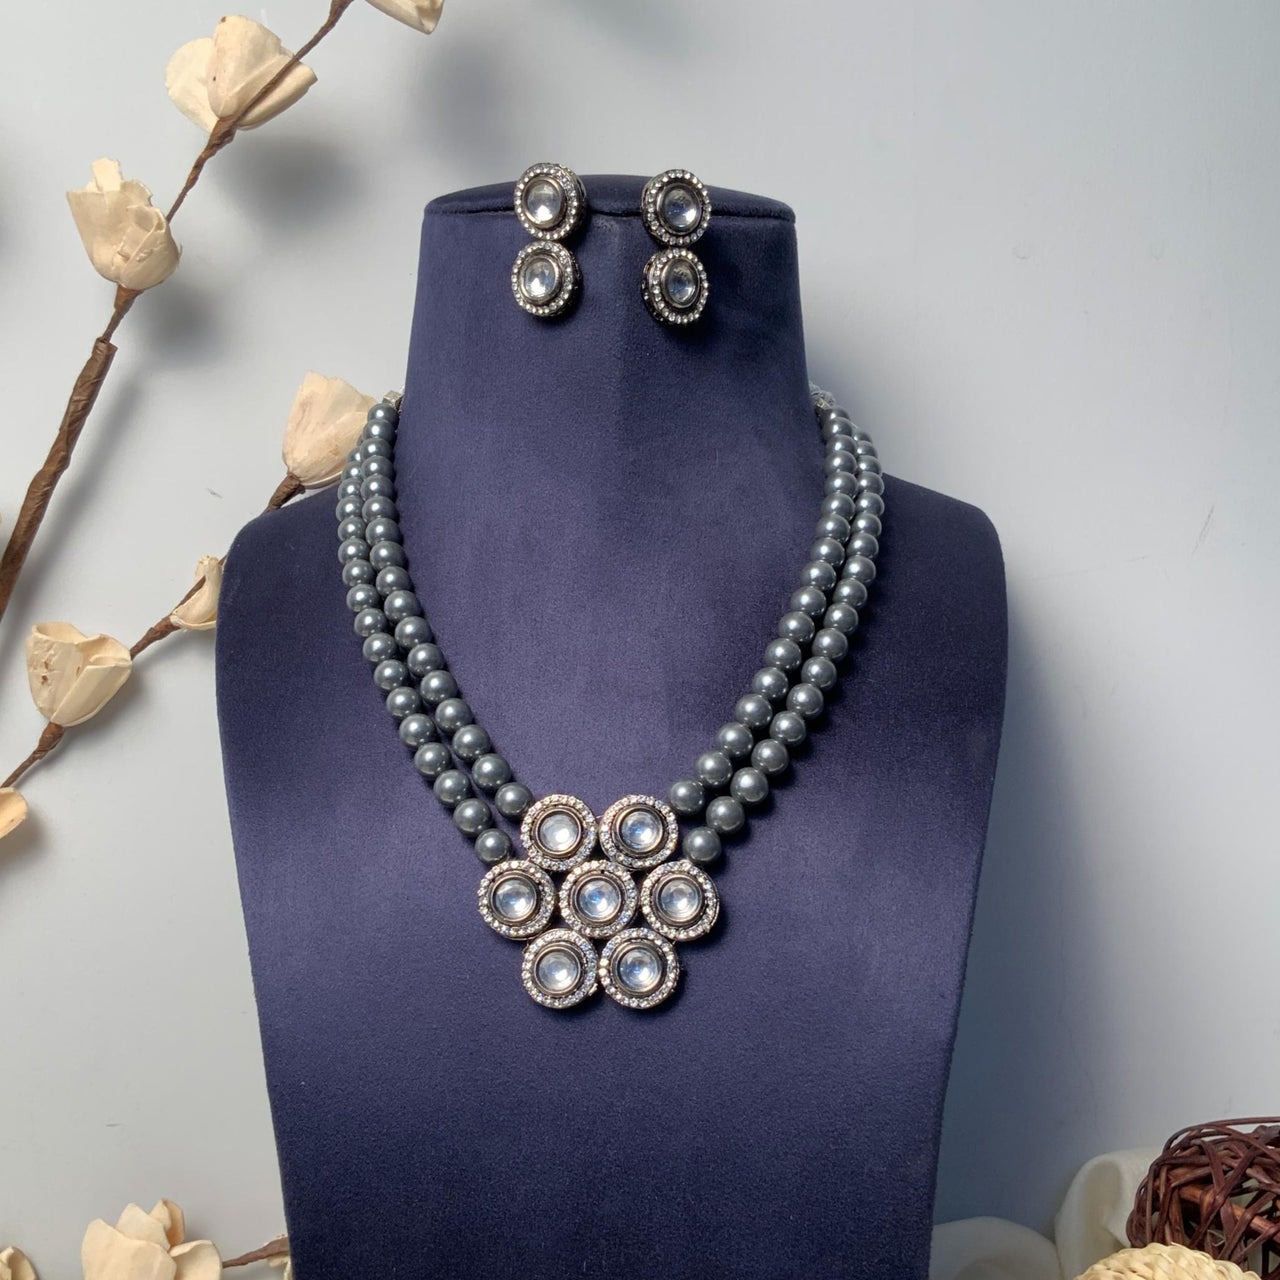 Statement Victorian Floral Polki Necklace With Grey Pearls